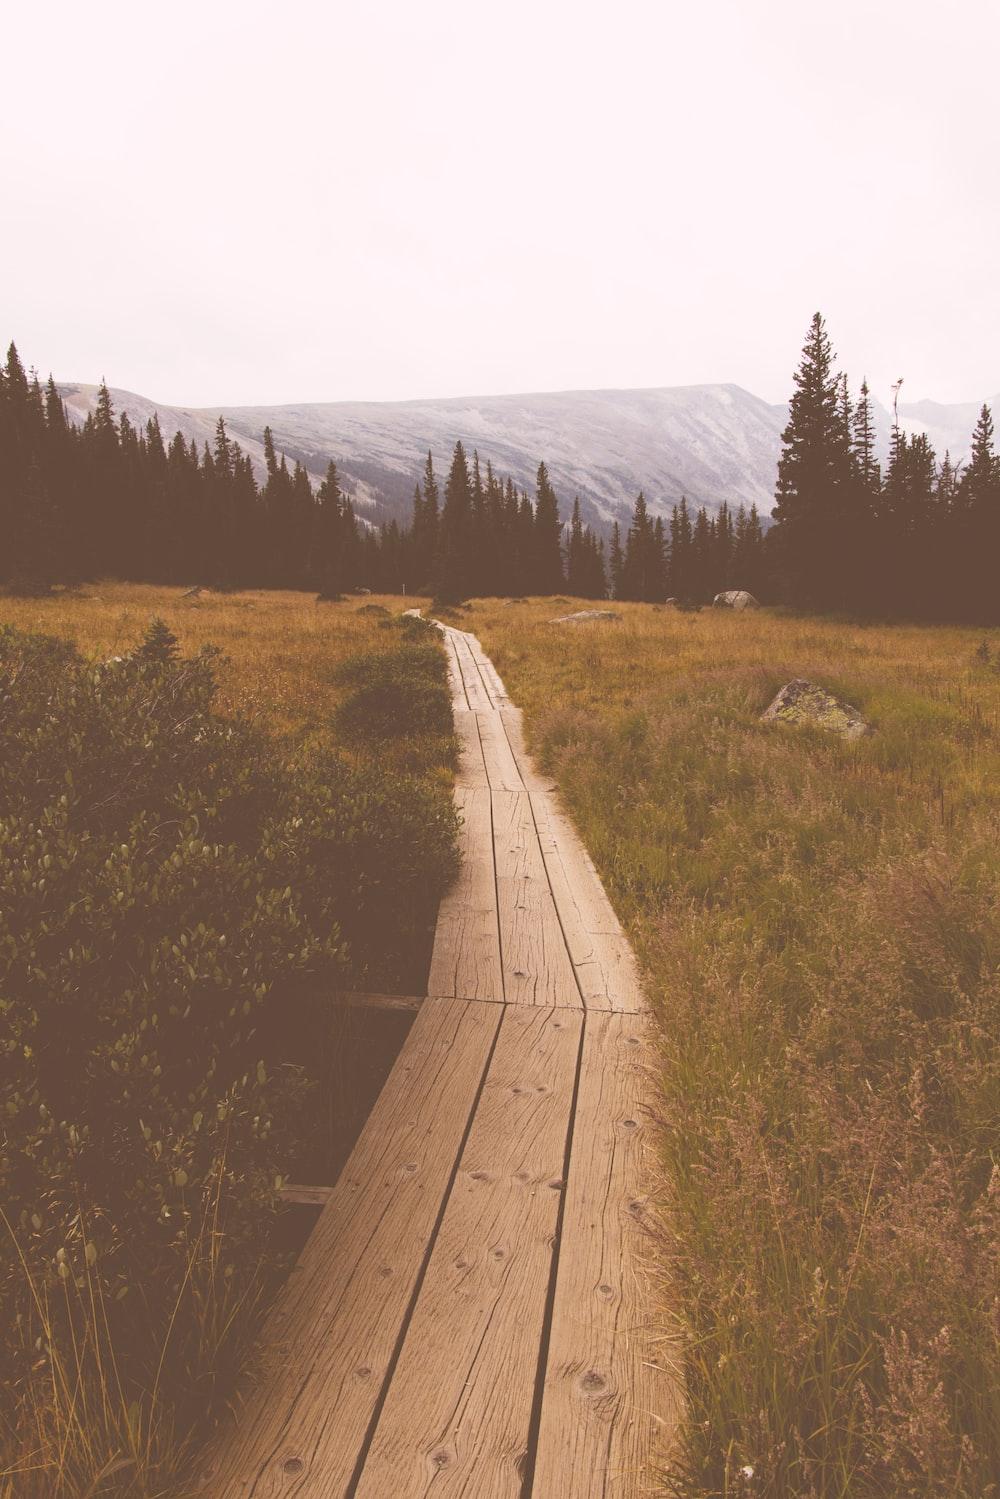 Wooden pathway between grassfield photo Free Ward Image on